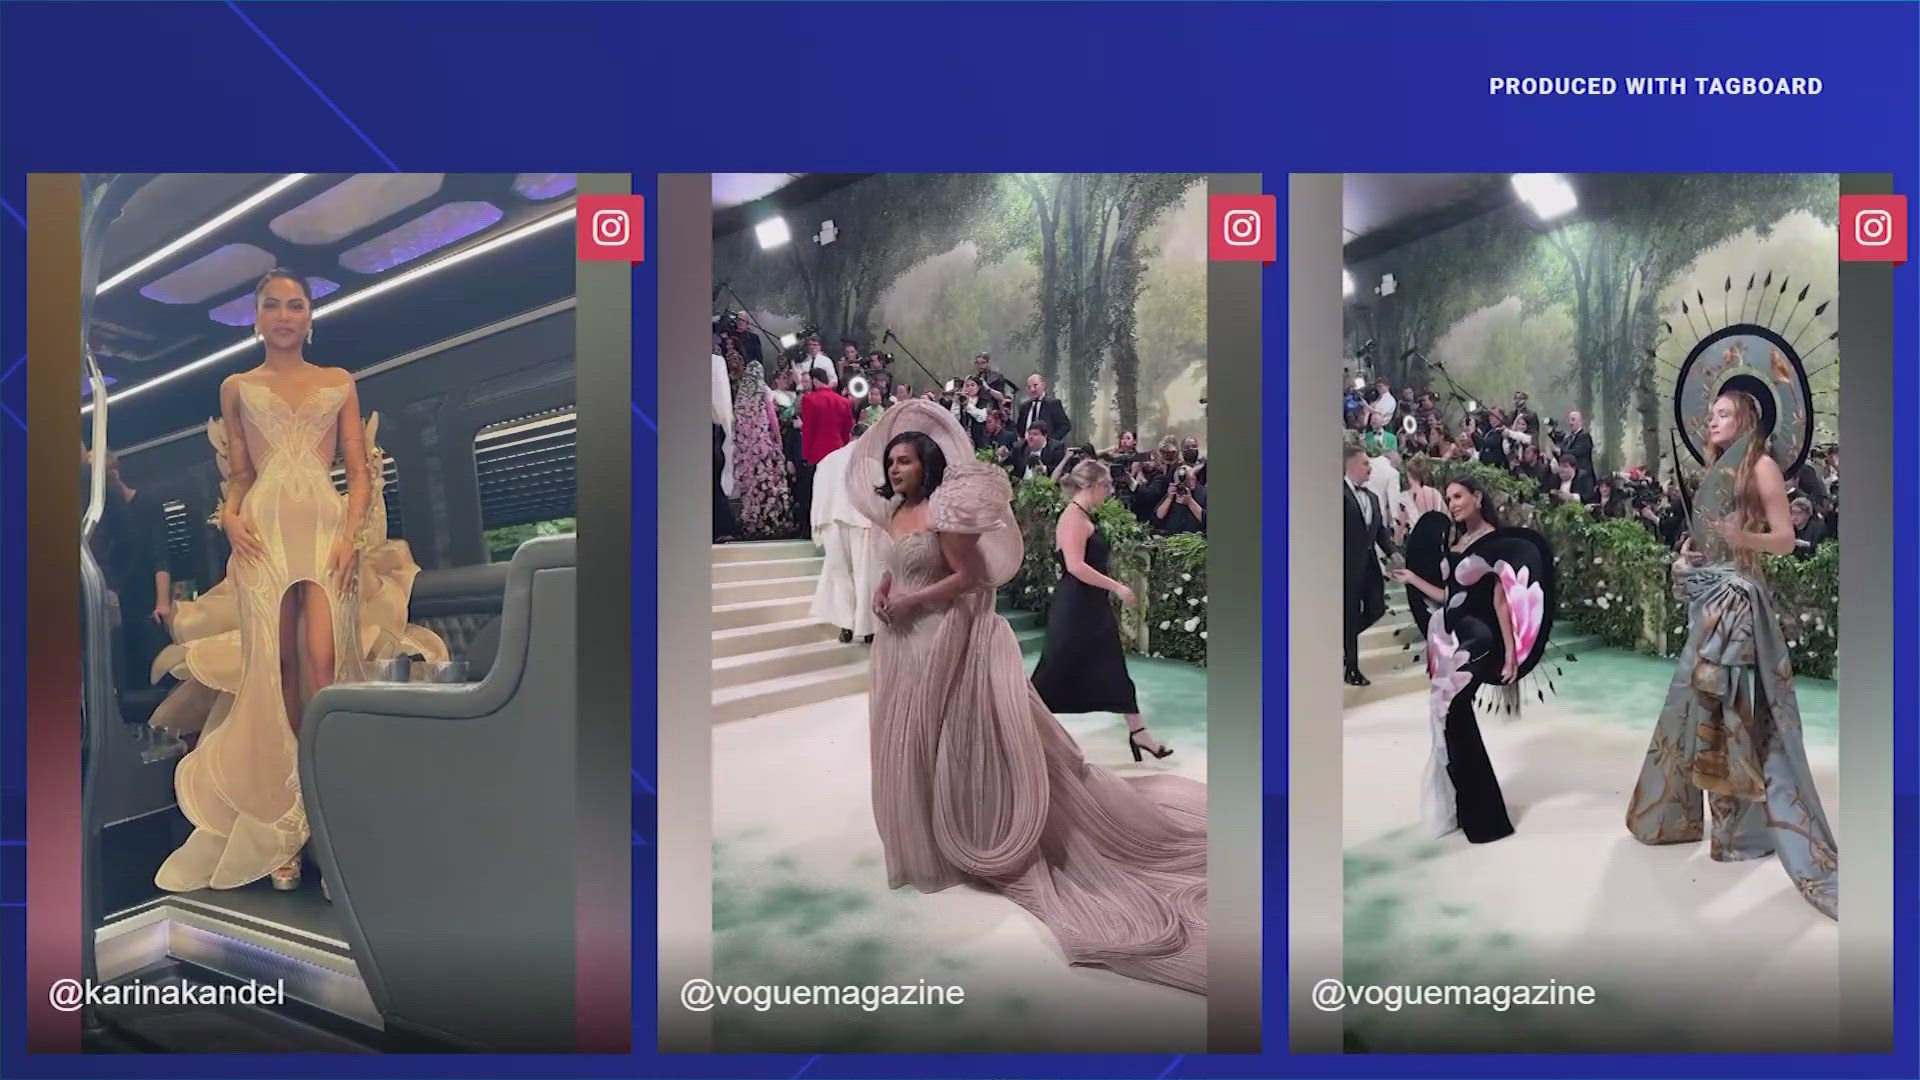 Fashion is always the story at the annual Met Gala. On KHOU 11 Morning News Tuesday, we took a look at some of the more eye-catching looks.